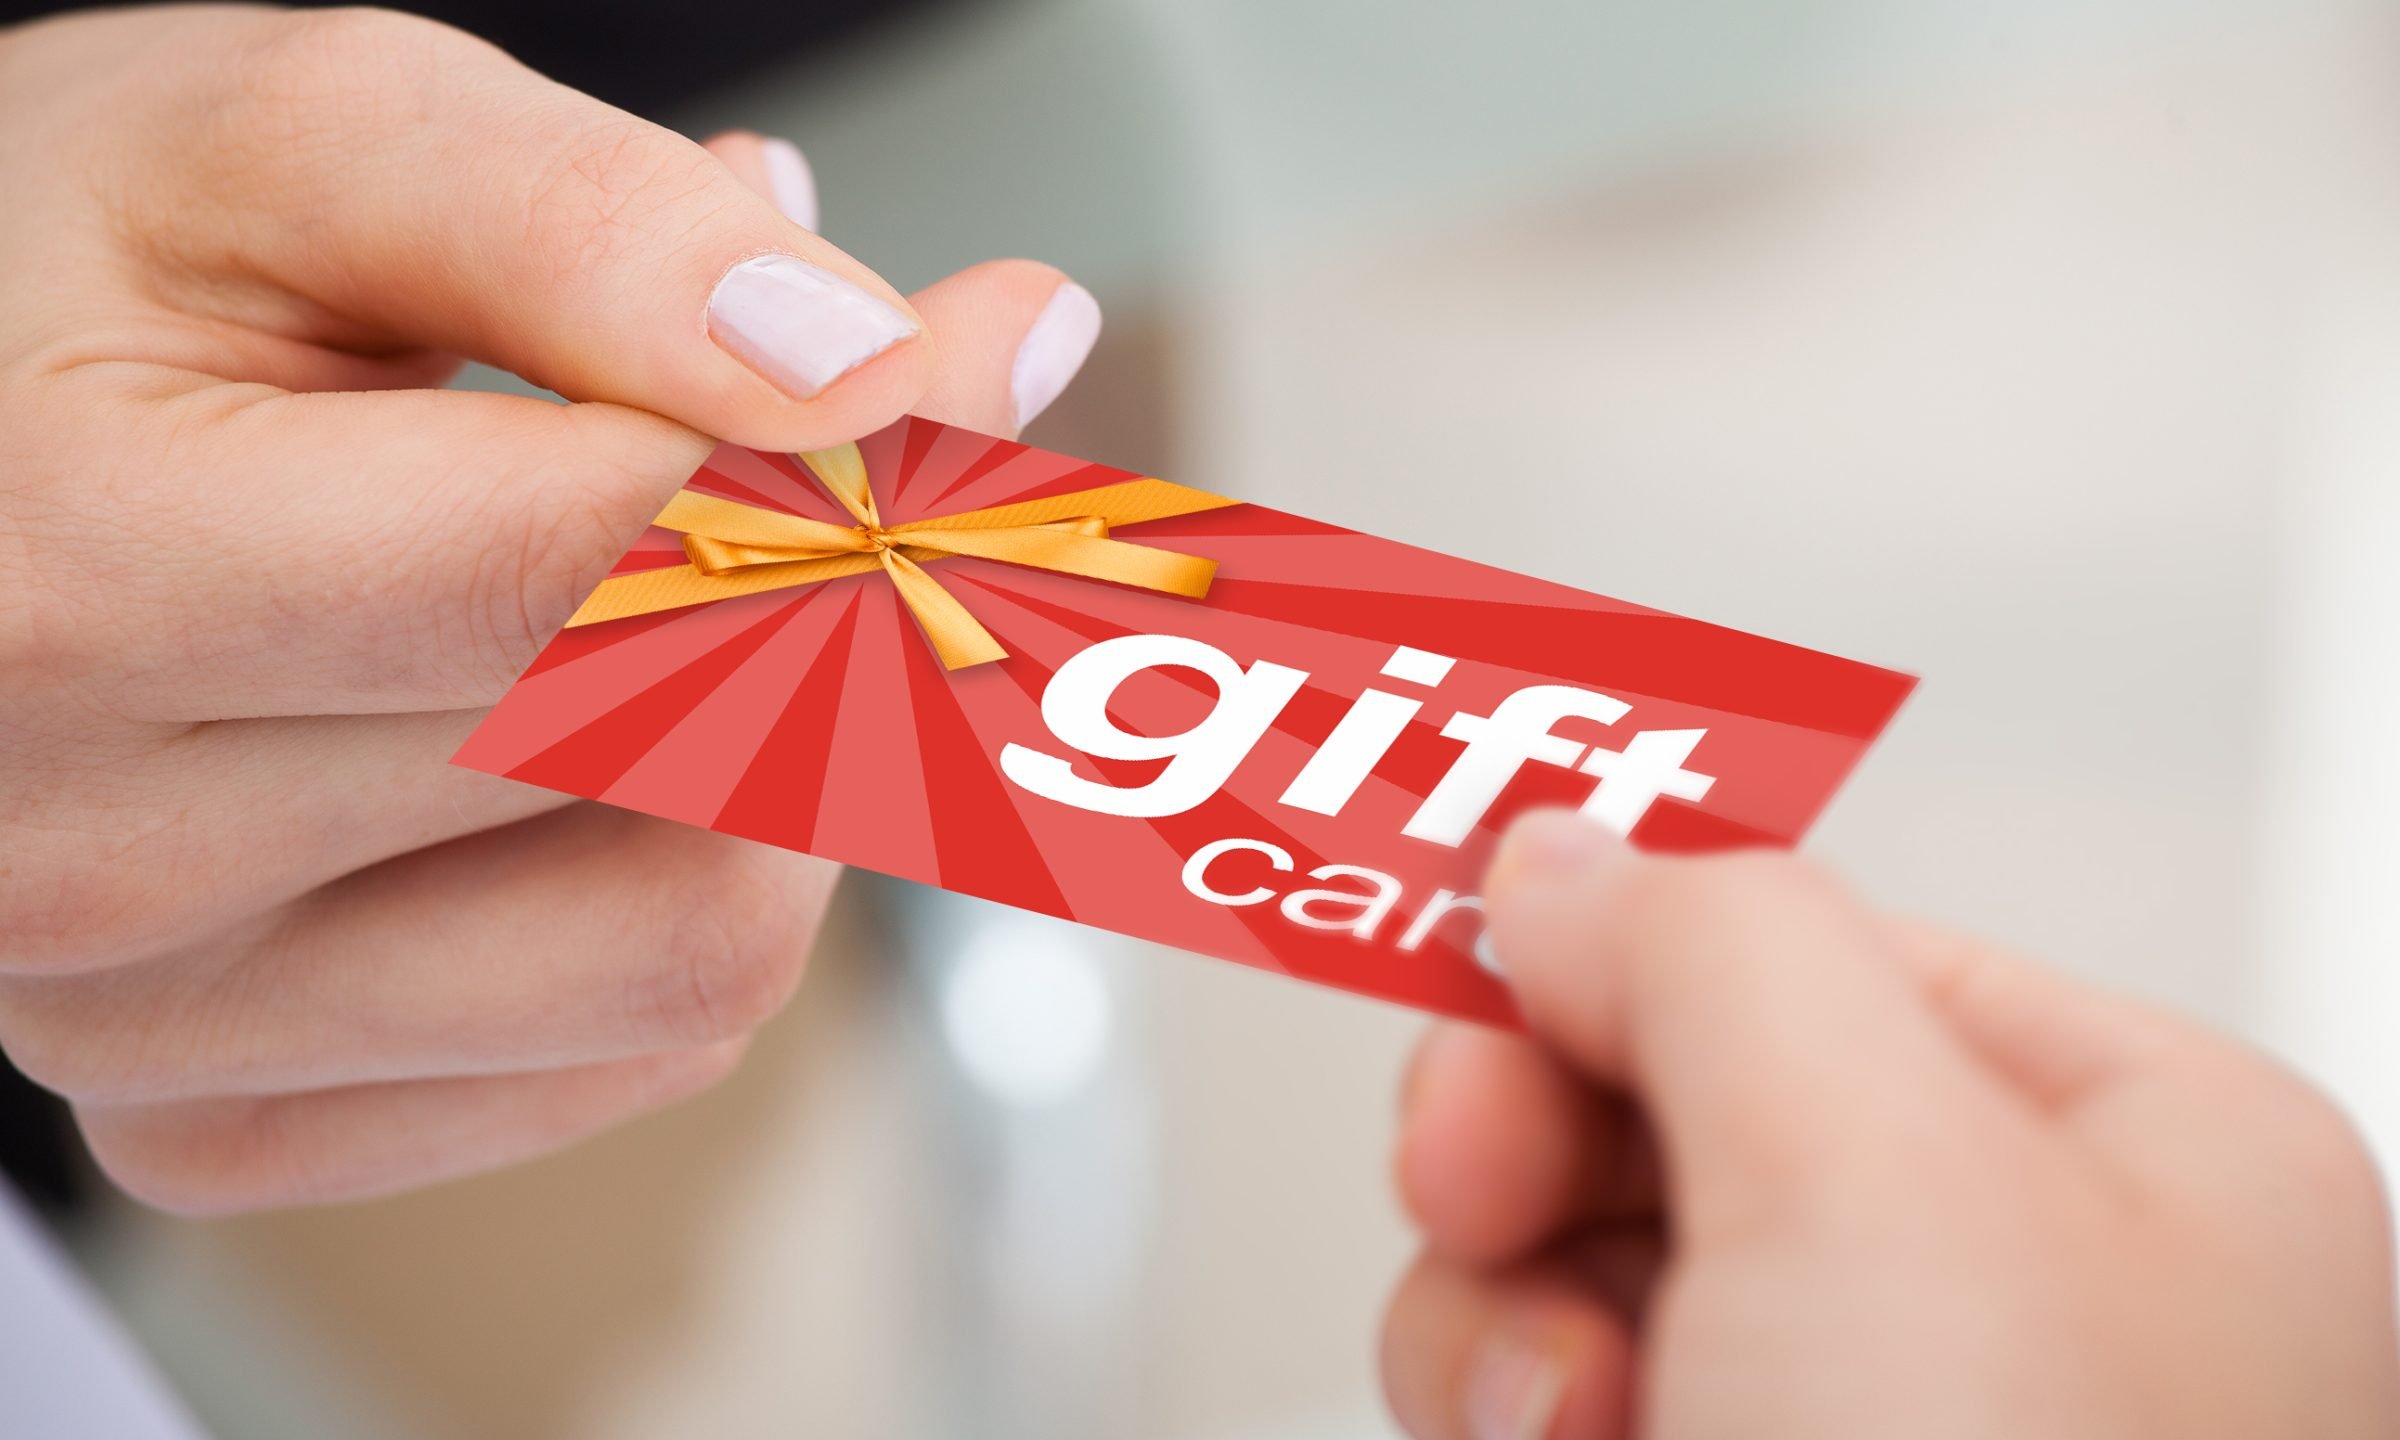 Ten Gift Cards For the Elderly For Anything That They Might Need